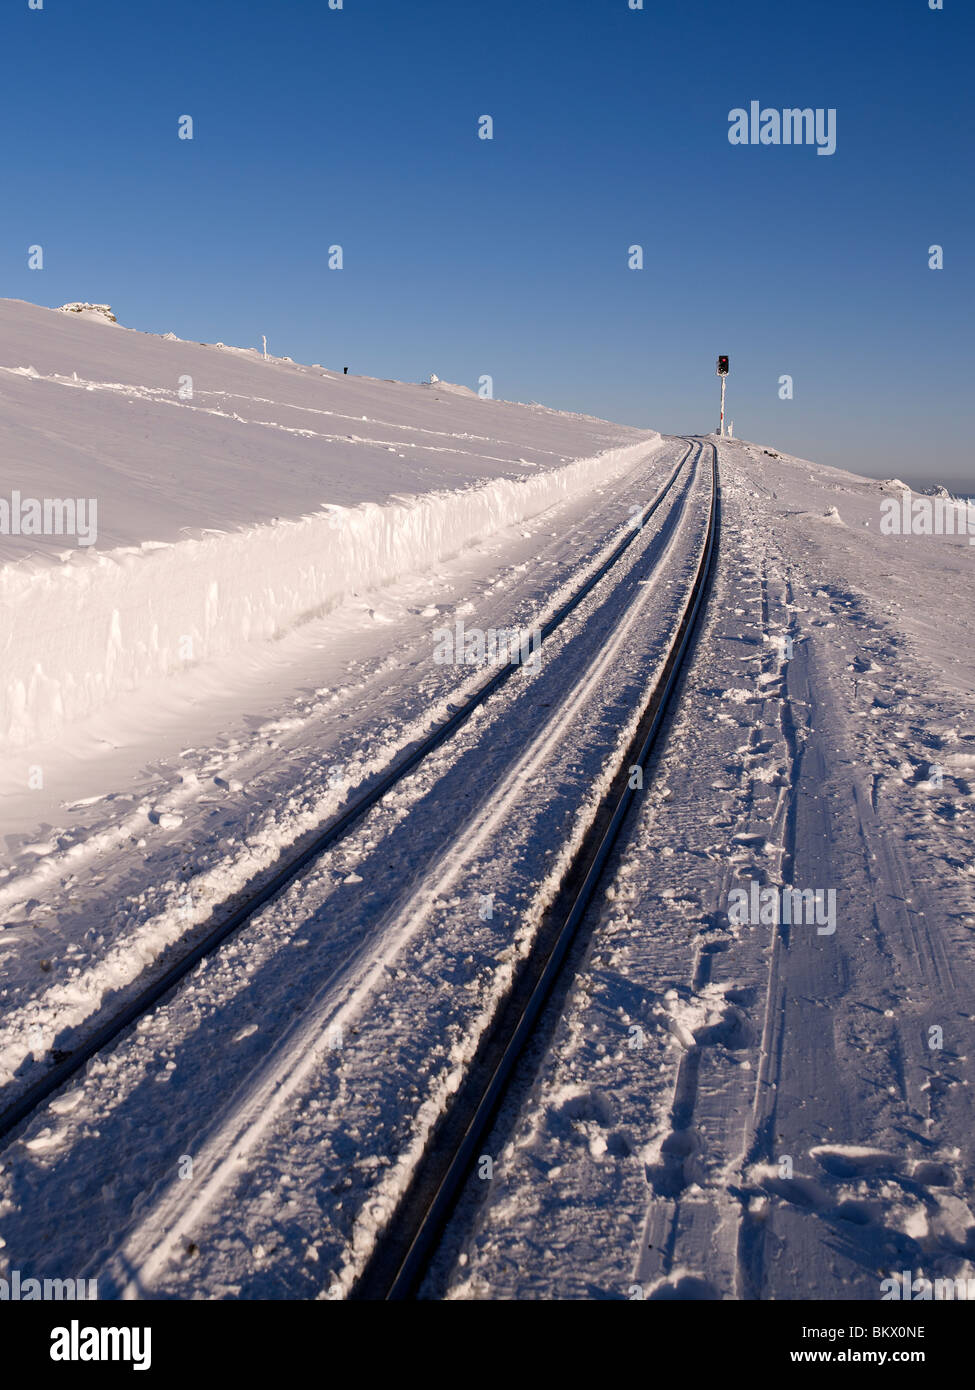 Snowy rail with signal lamp on the highest mountain of the northern part of Germany,called Brocken,Harz,Germany Stock Photo